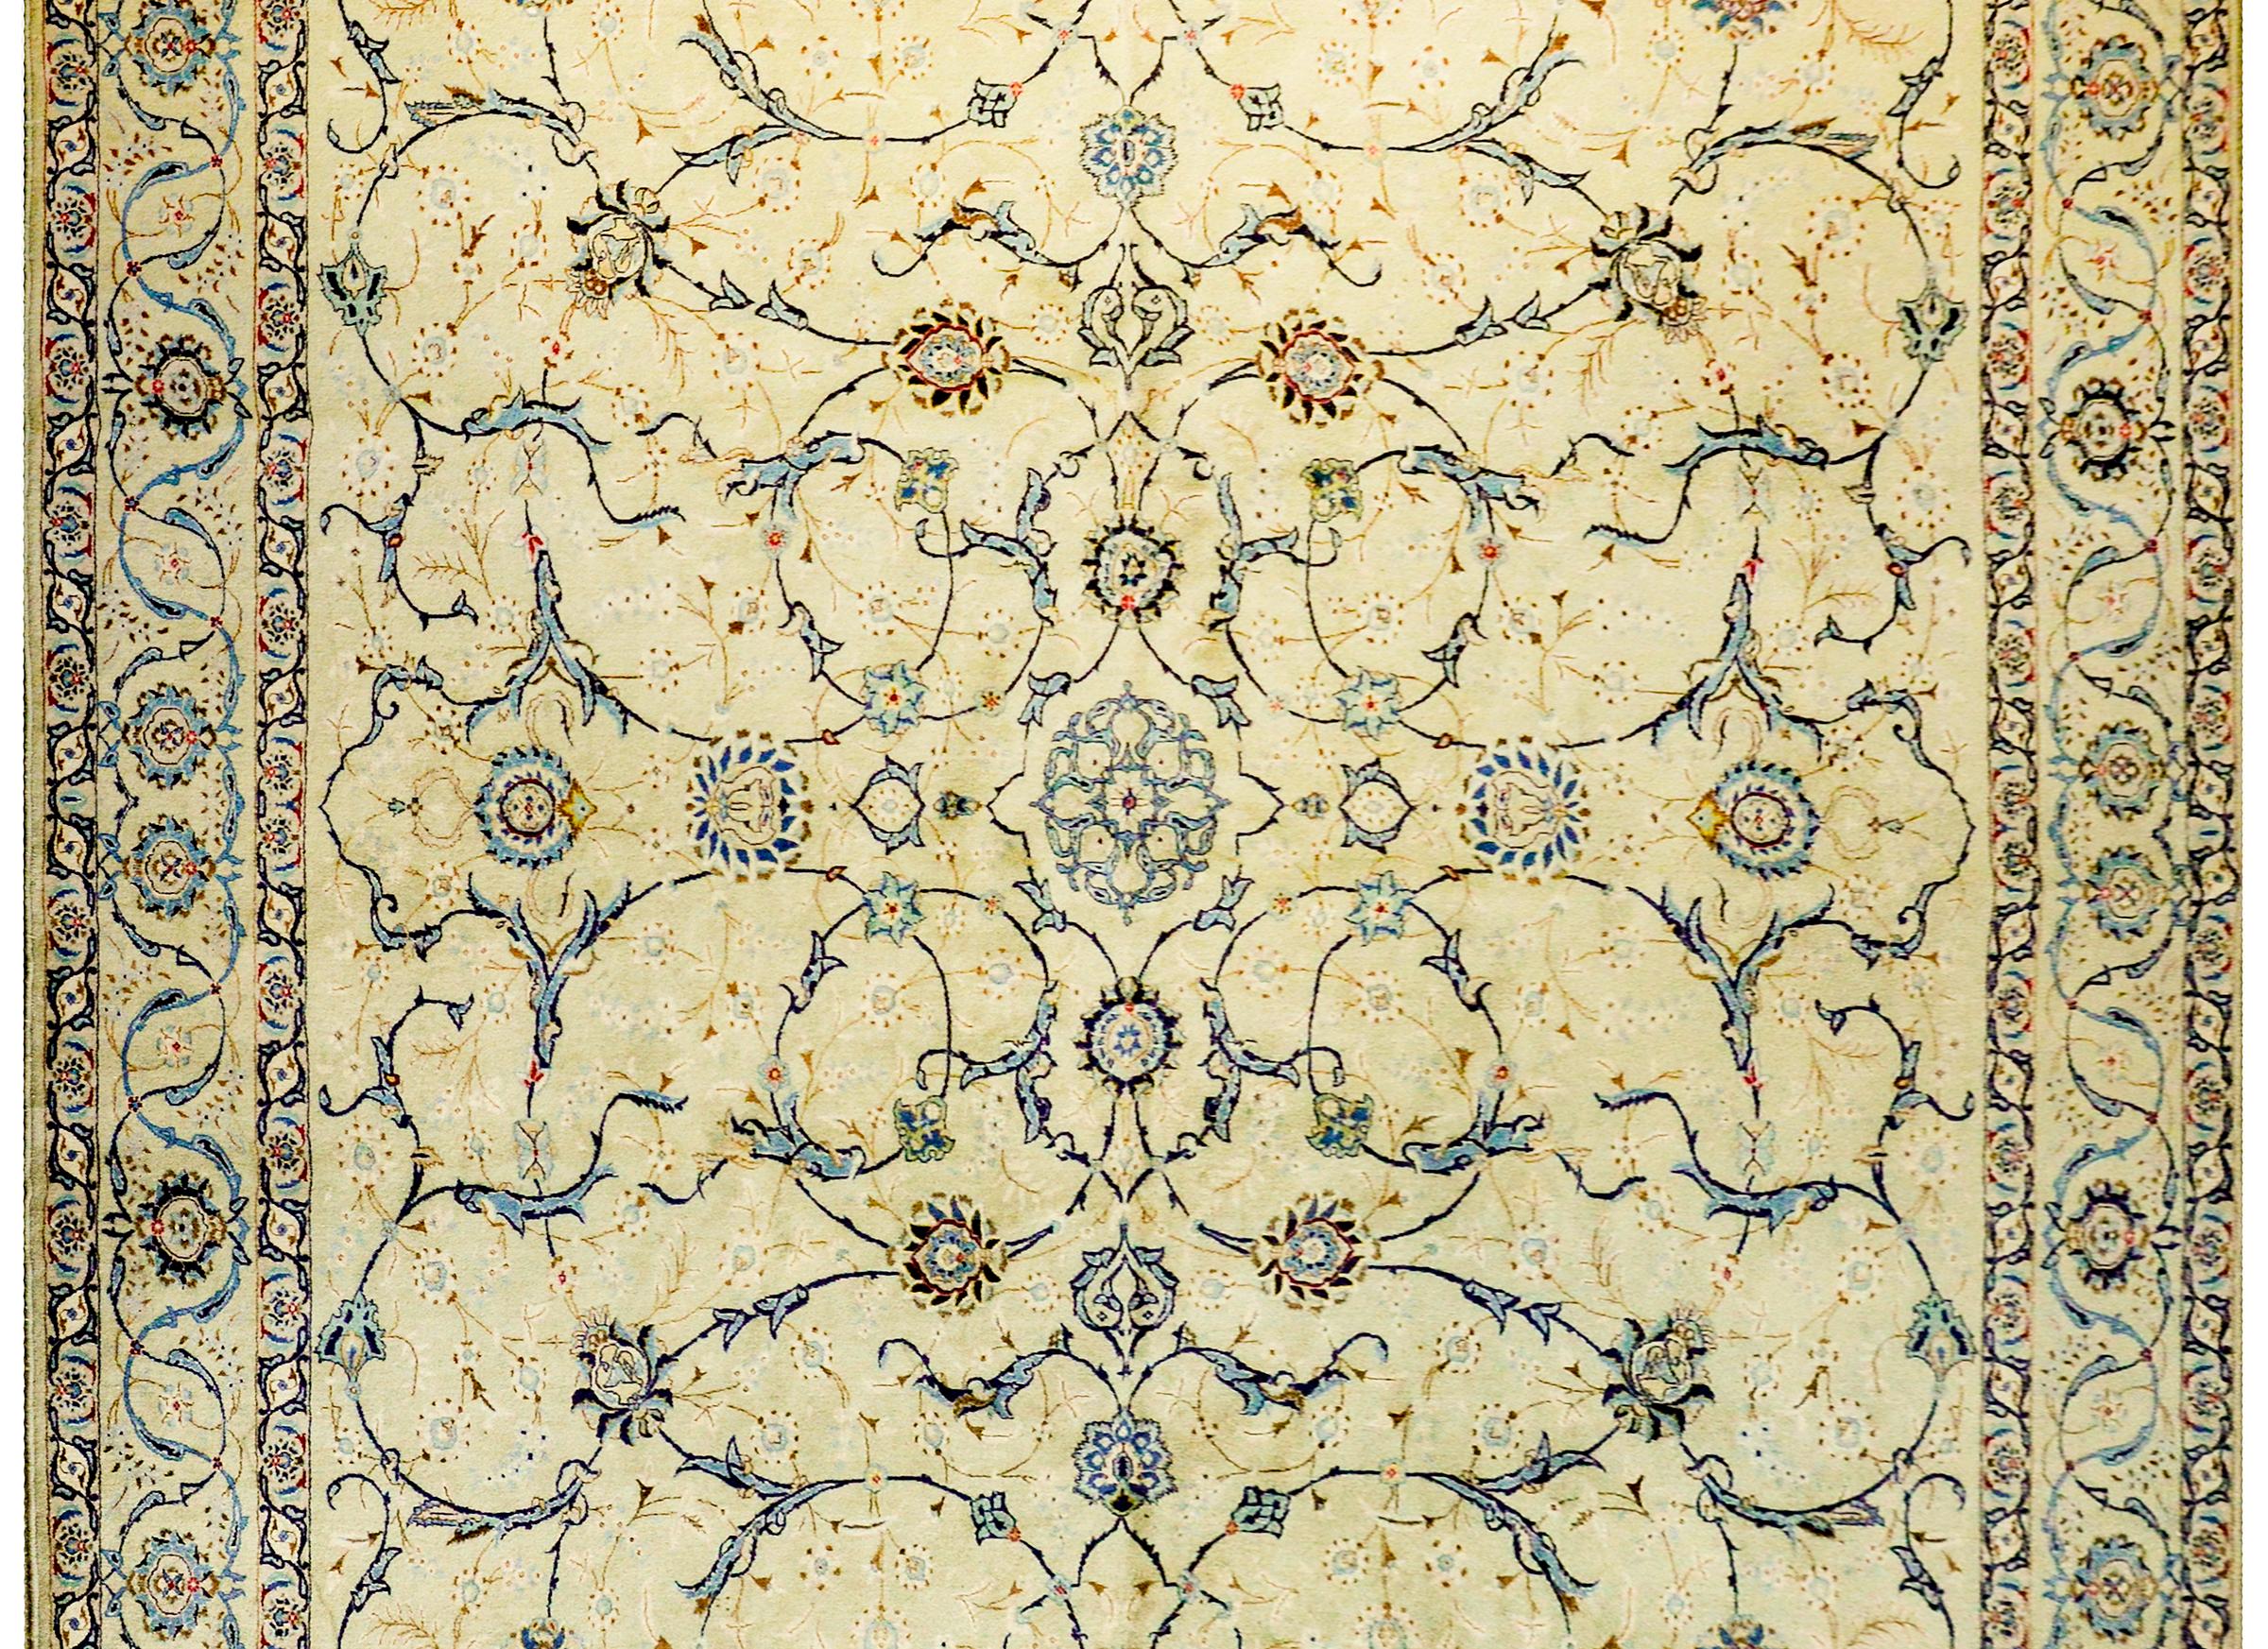 An unbelievable early 20th century Persian antique Kashan rug with an amazing and skillfully rendered pattern with a mirrored lacy scrolling vine and floral design, woven in crimson, indigo, gold, and white wool on a beautiful champagne colored